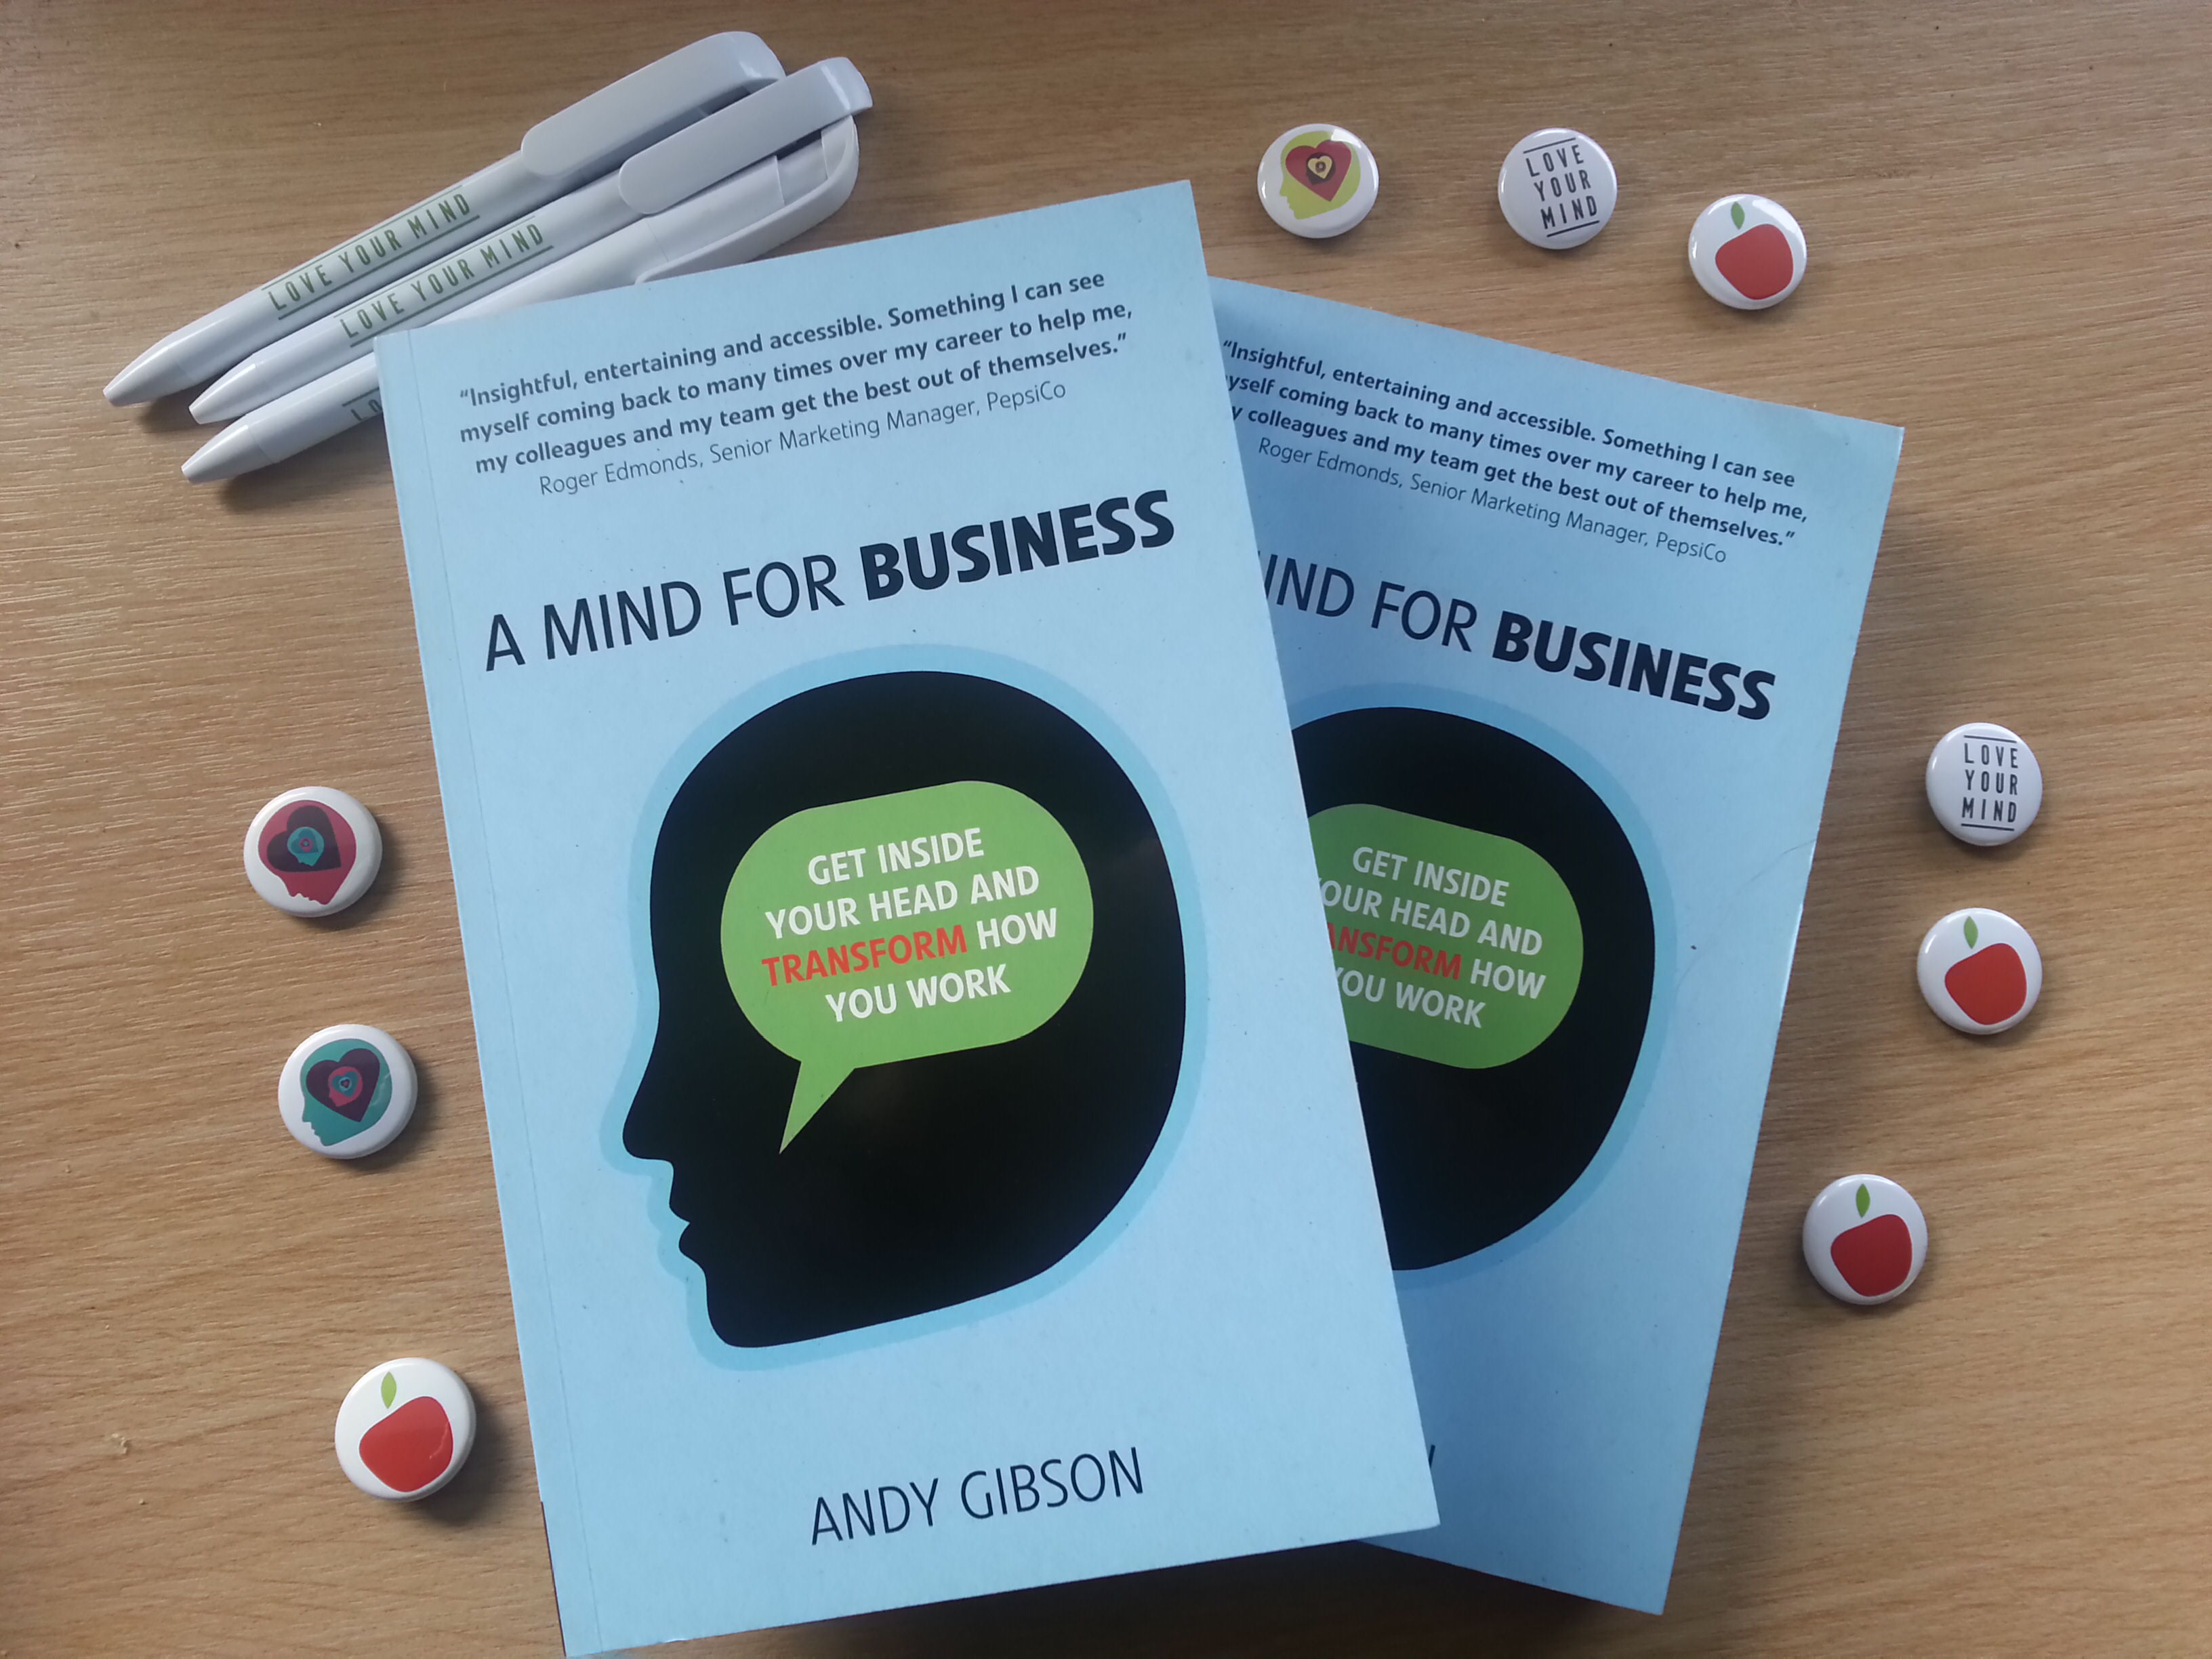 A Mind for Business by Andy Gibson